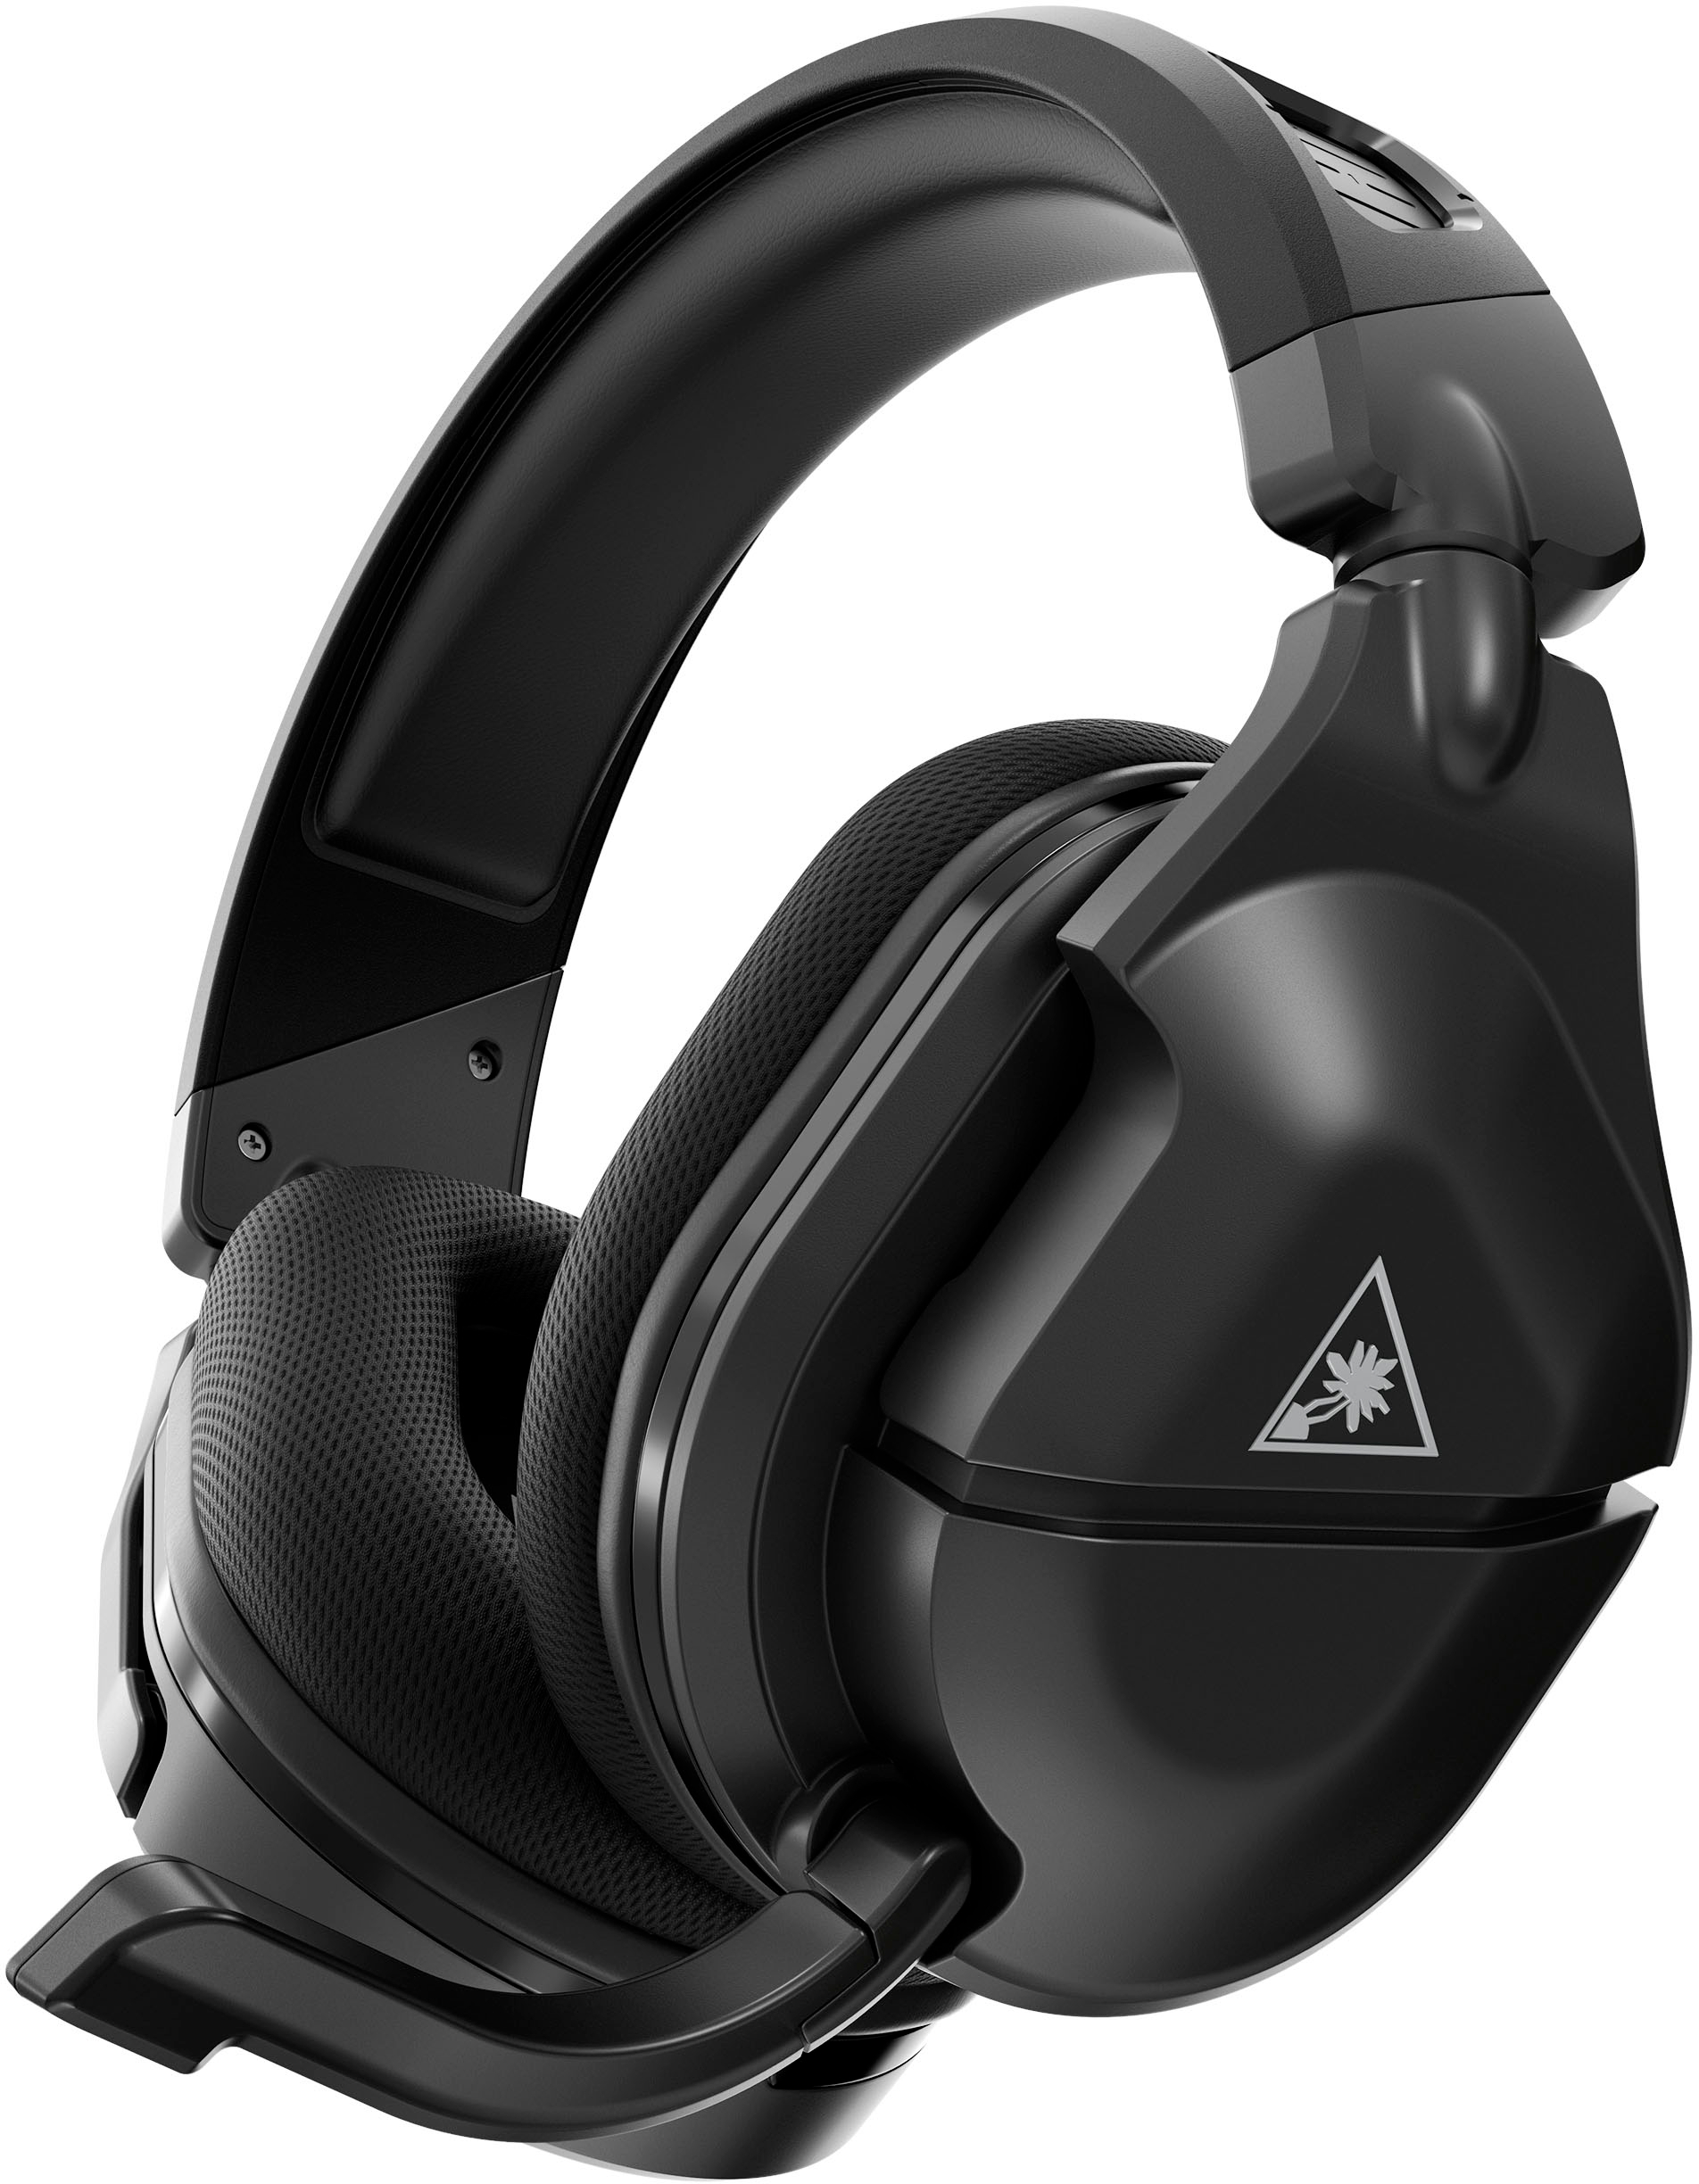 New Turtle Beach Stealth 600 Gen 2 Headset for PS4 & PS5 - Black